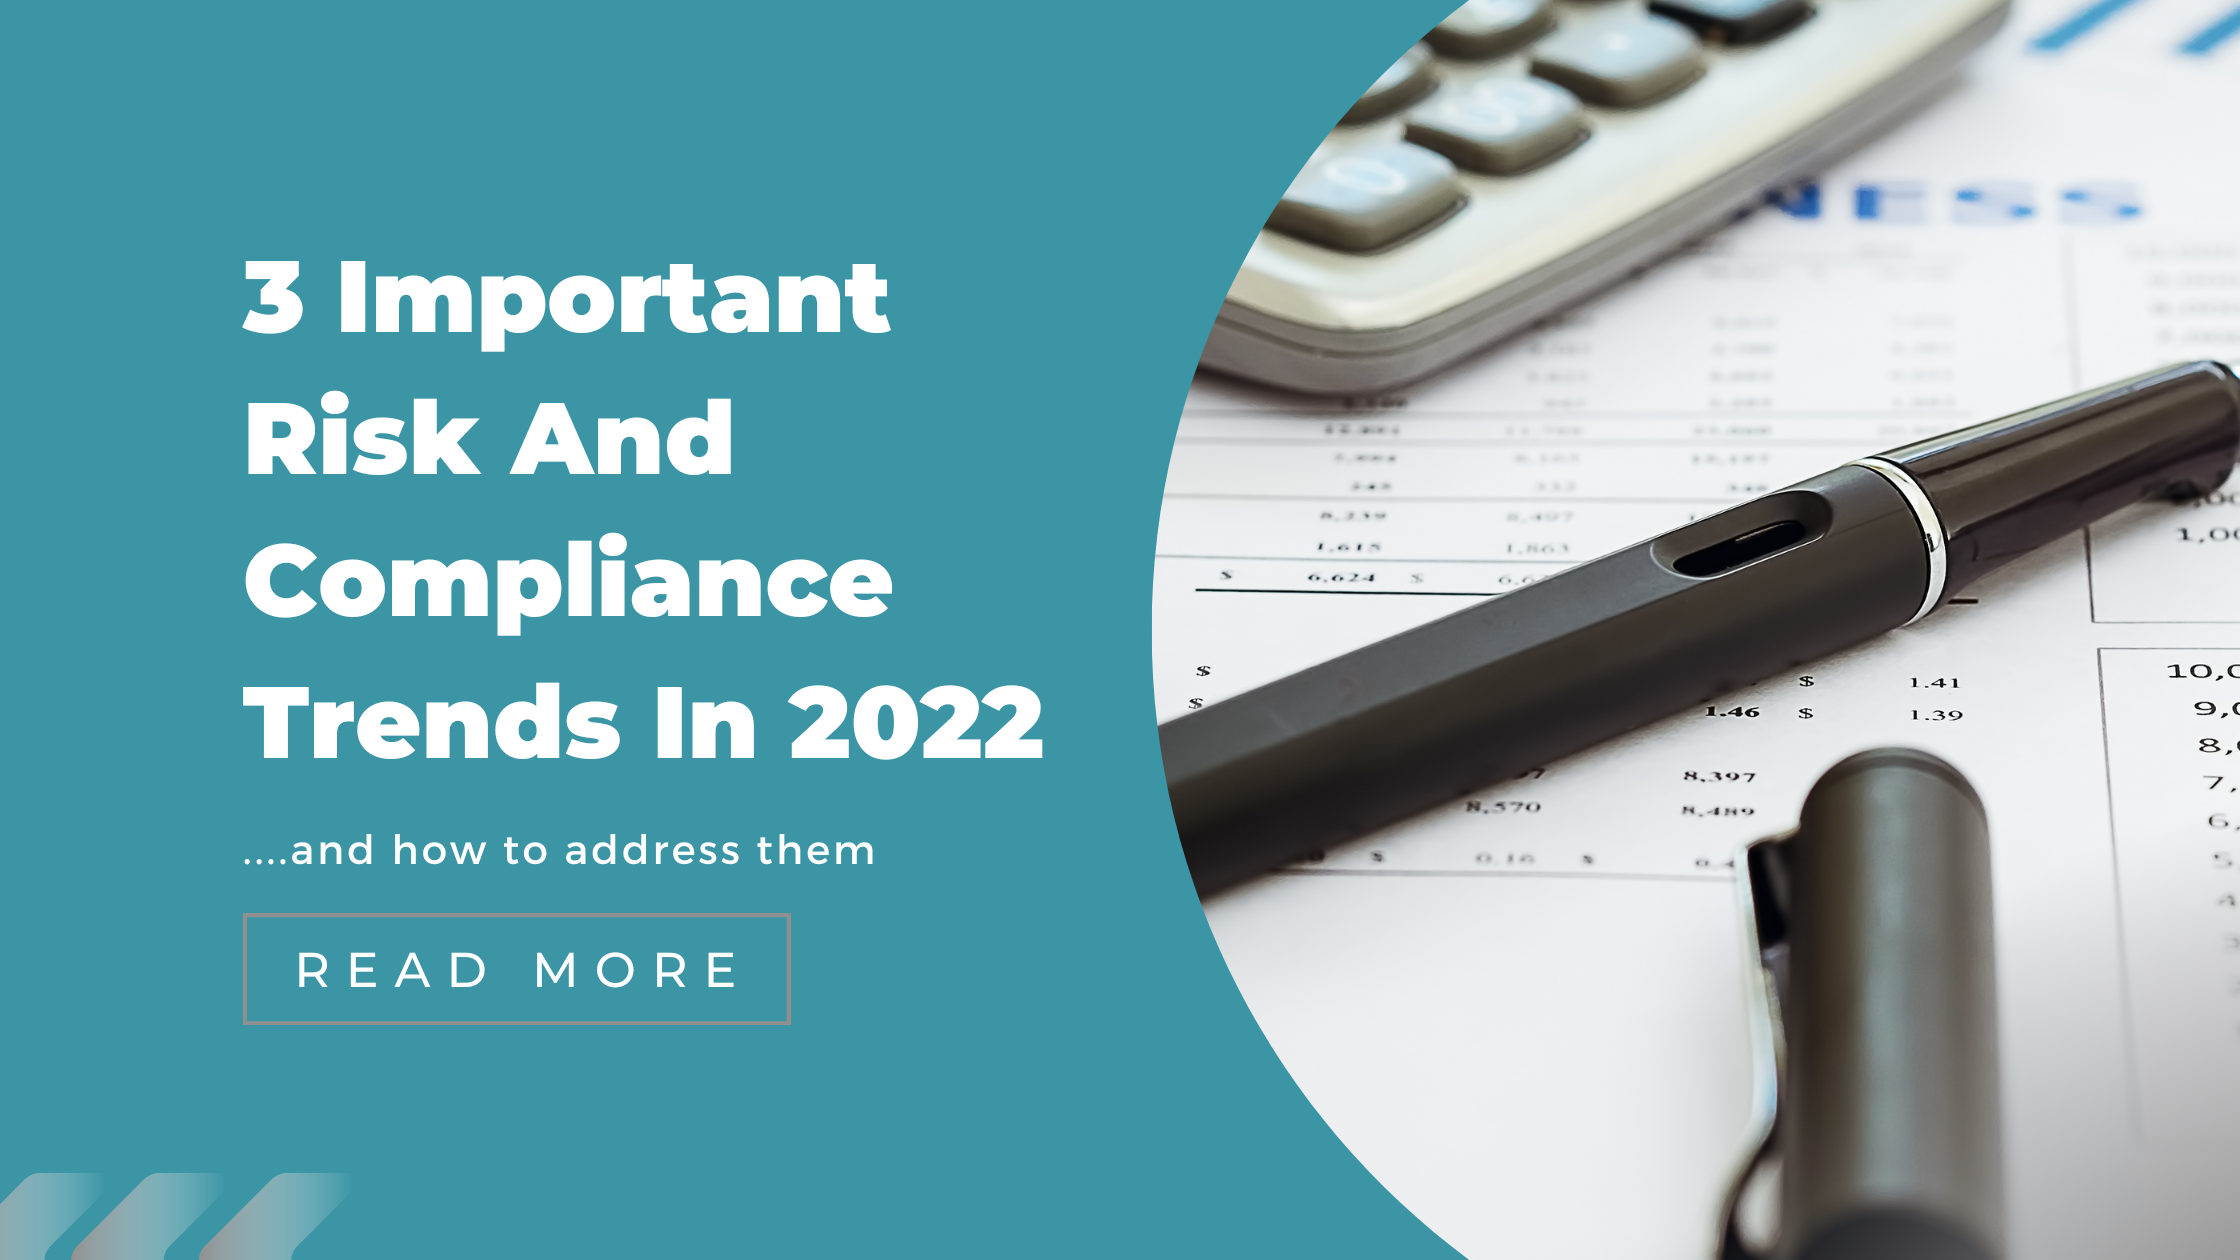 3 Important Risk And Compliance Trends In 2022 and How To Help Prevent Them